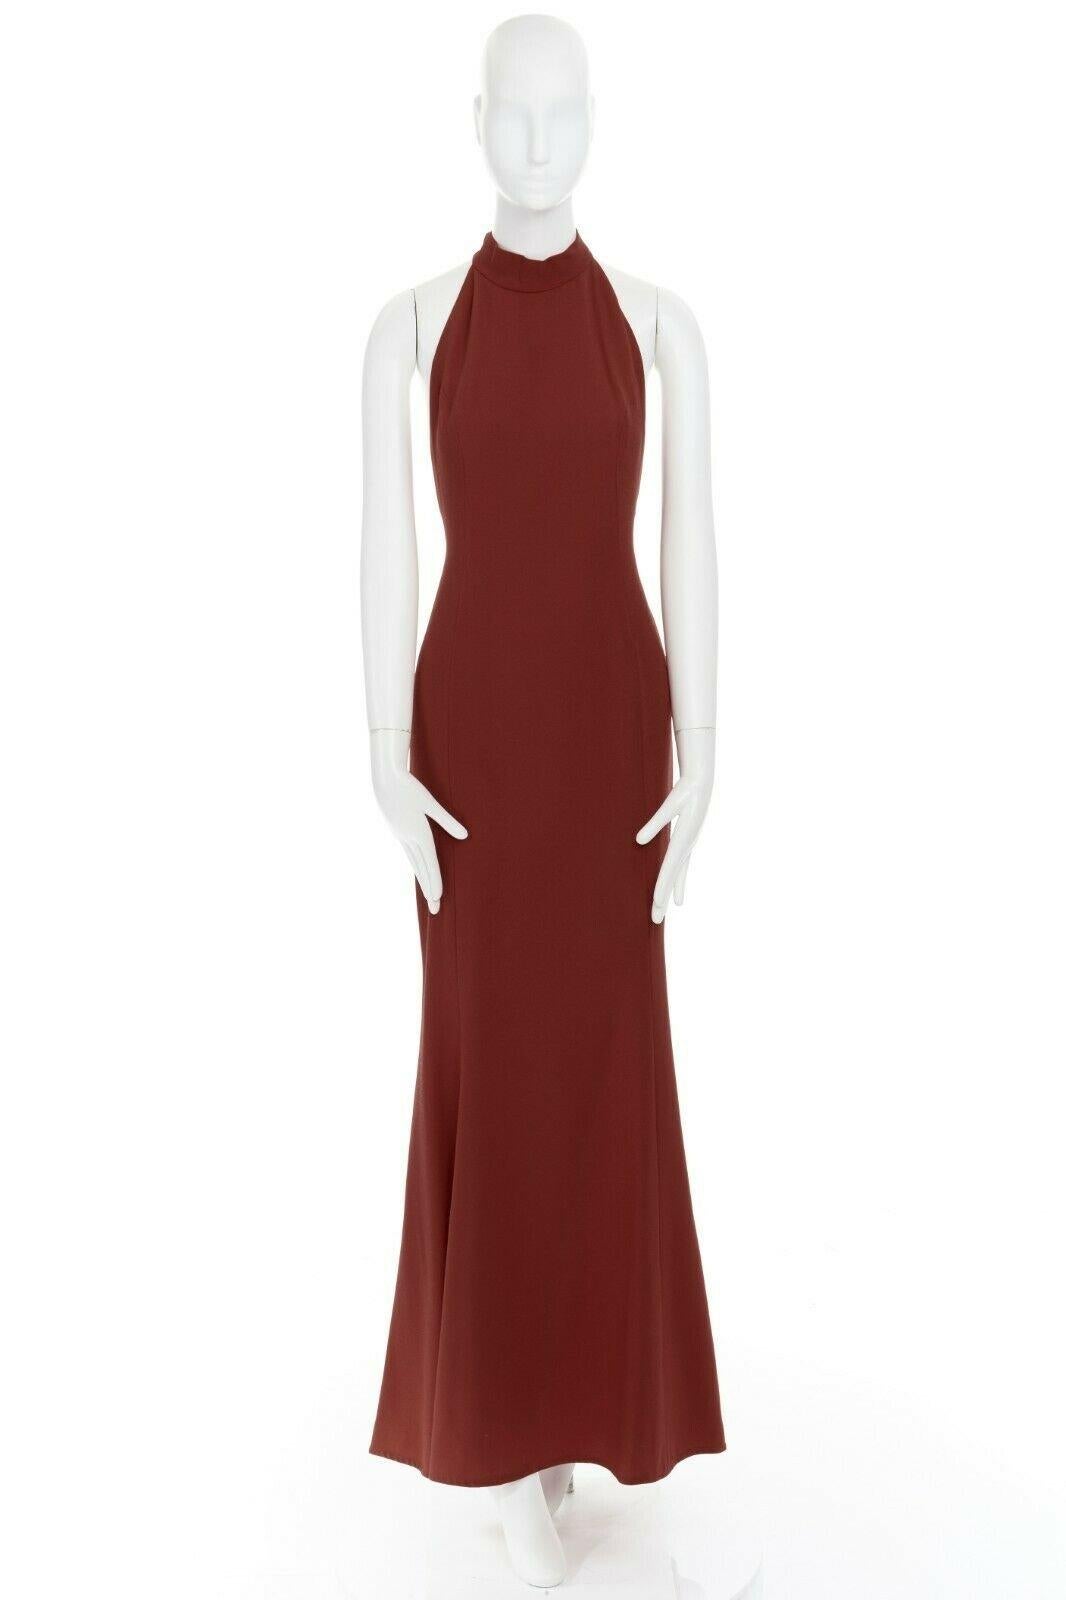 VALENTINO Vintage red crepe high halter neck racer back tie evening gown US6 M 
Reference: LACG/A00316 
Brand: Valentino 
Material: Acetate 
Color: Red 
Pattern: Solid 
Extra Detail: Acetate, wool, viscose. Scarlet red. High halter neck. Decorative